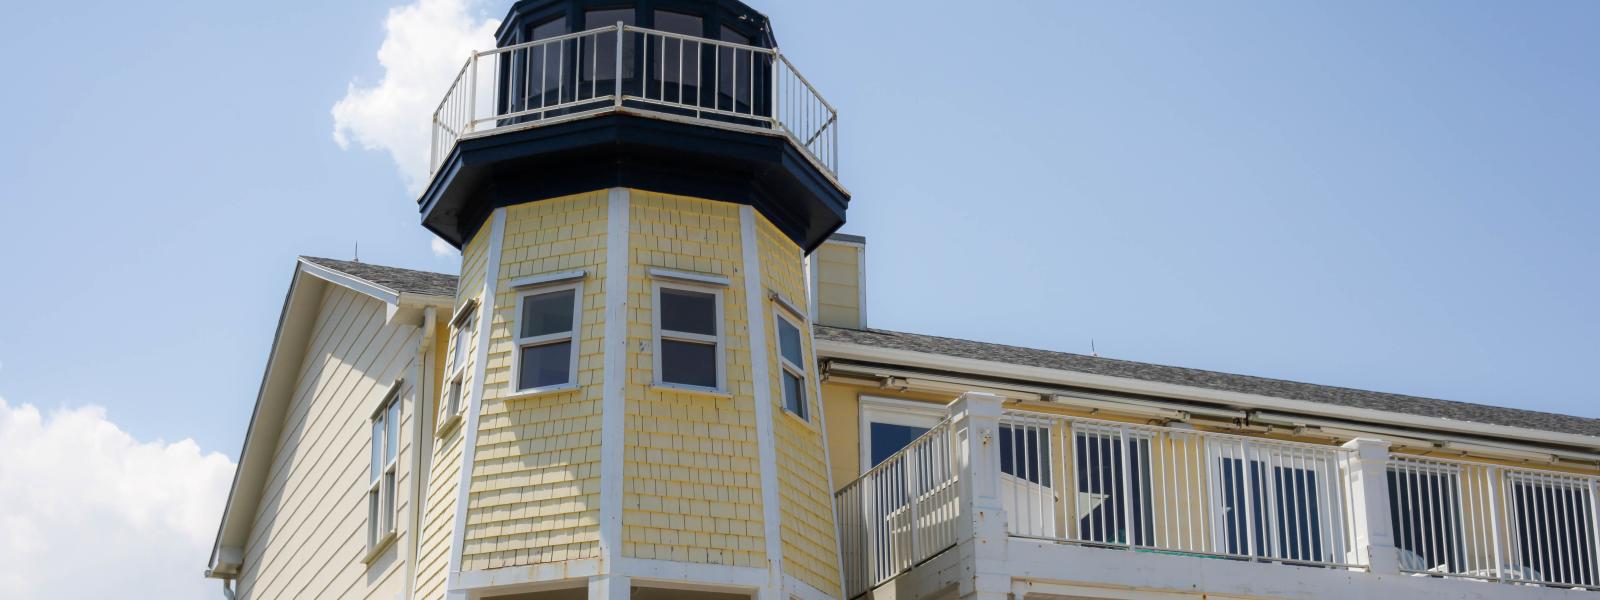 Places to Stay | Kure Beach, NC | Official Tourism Site